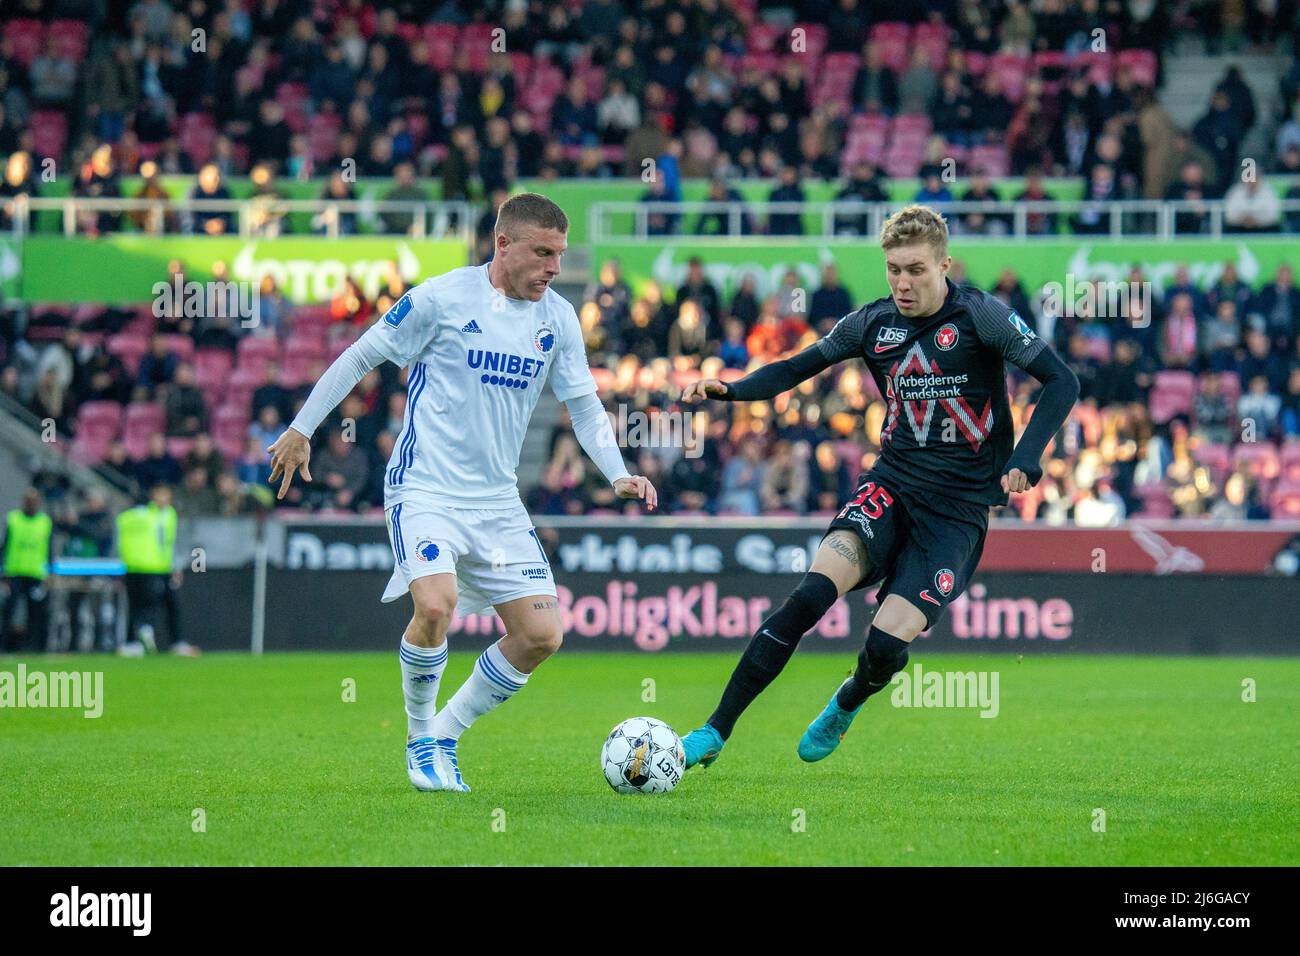 Herning, Denmark. 01st, May 2022. Pep Biel (16) of FC Copenhagen and Charles (35) of FC Midtjylland seen during the 3F Superliga match between FC Midtjylland and FC Copenhagen at MCH Arena in Herning. (Photo credit: Gonzales Photo - Nicolai Berthelsen). Stock Photo